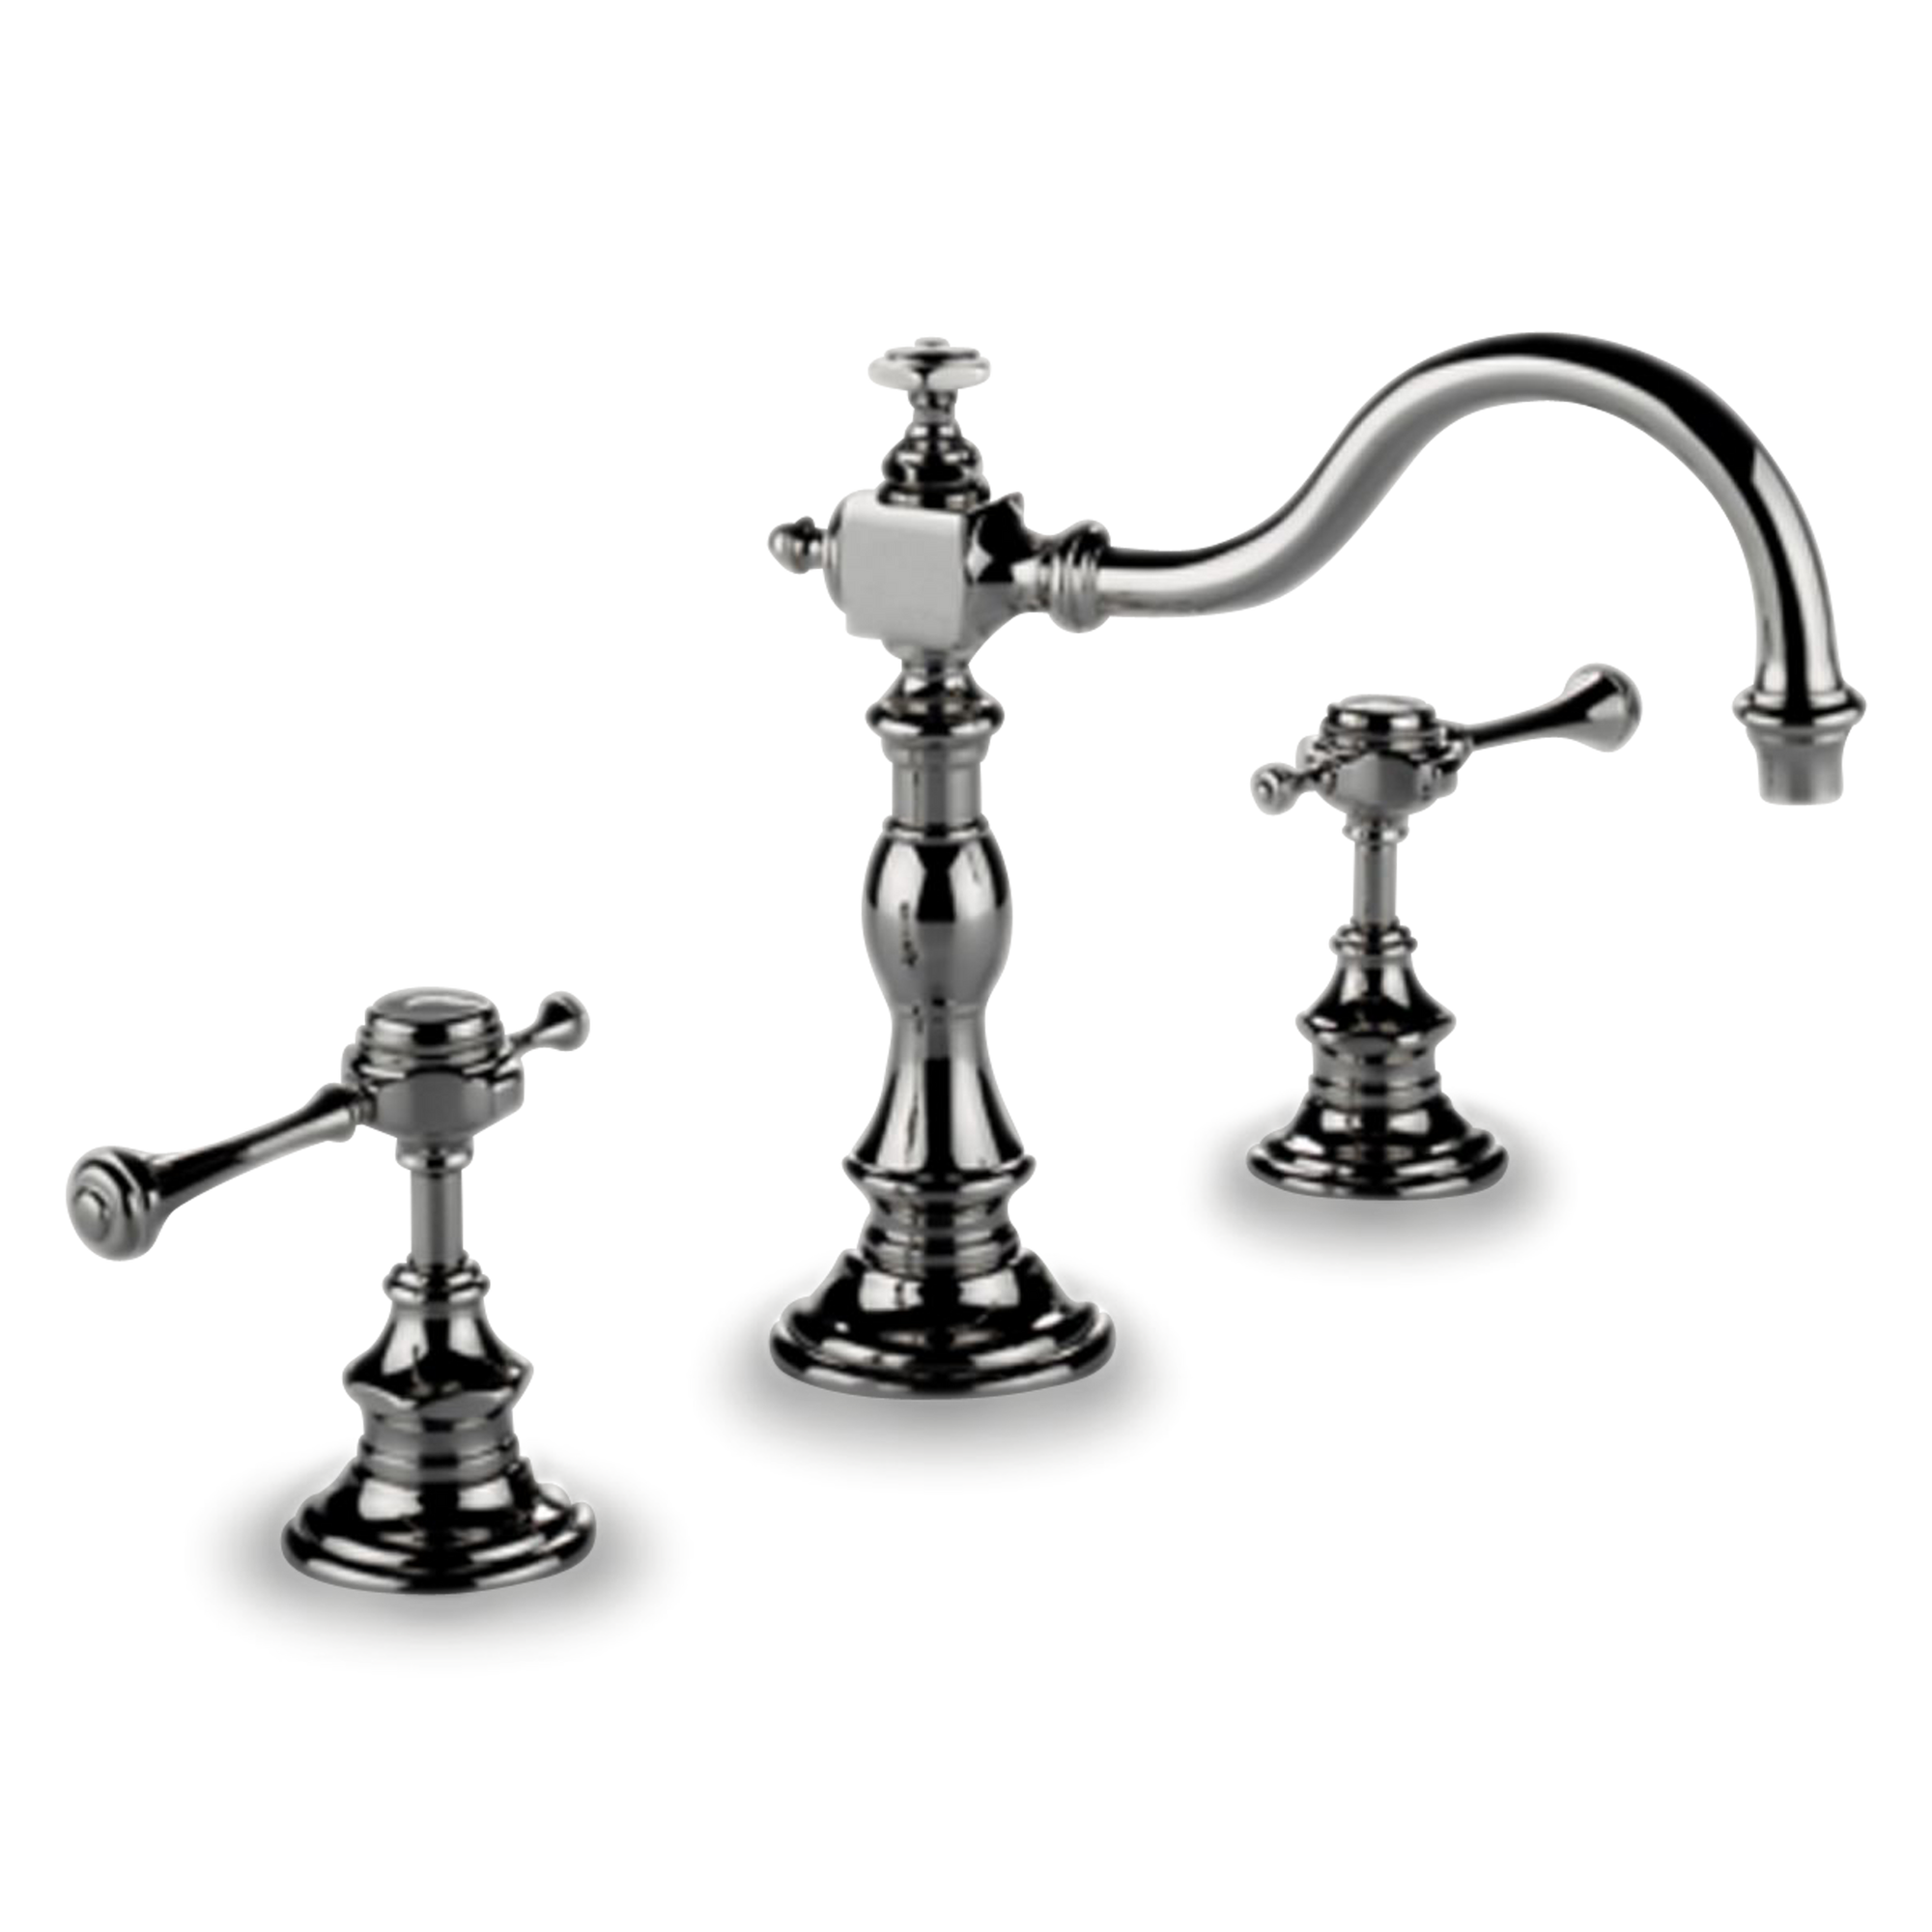 A traditional widespread faucet with lever handles.